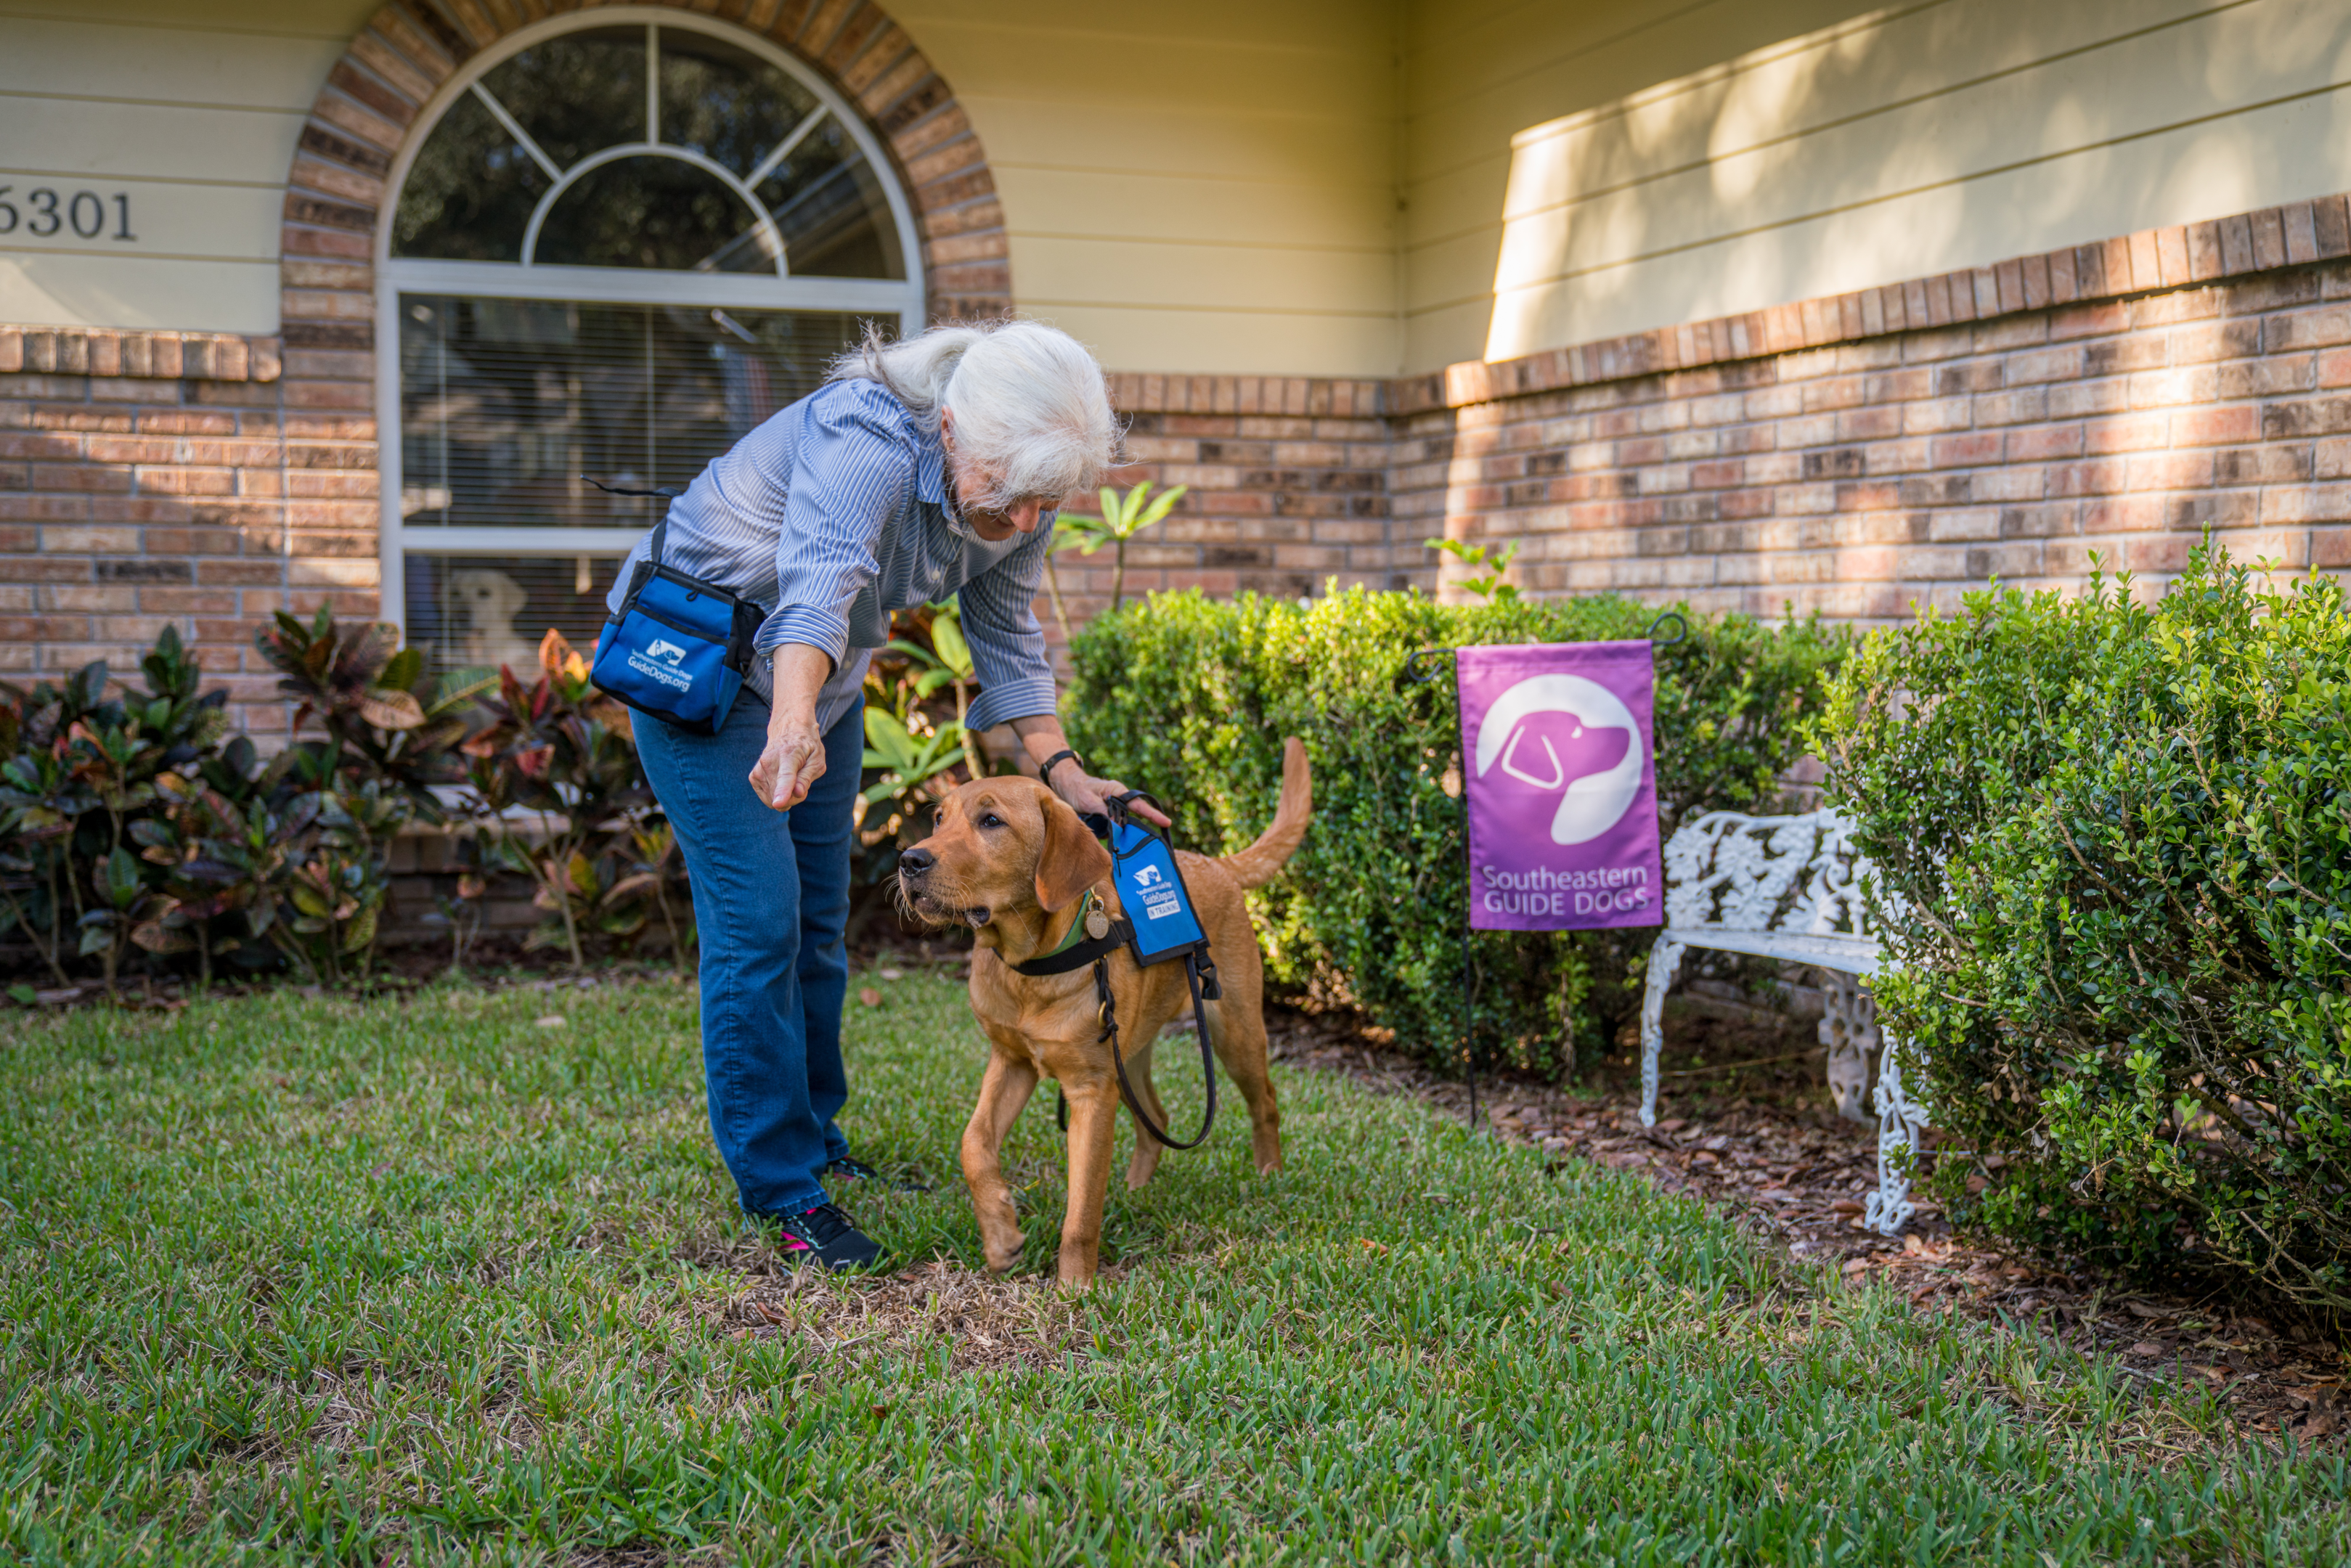 A Southeastern Guide Dog volunteer puppy raiser training the Harness On cue to a young Labrador at their home.